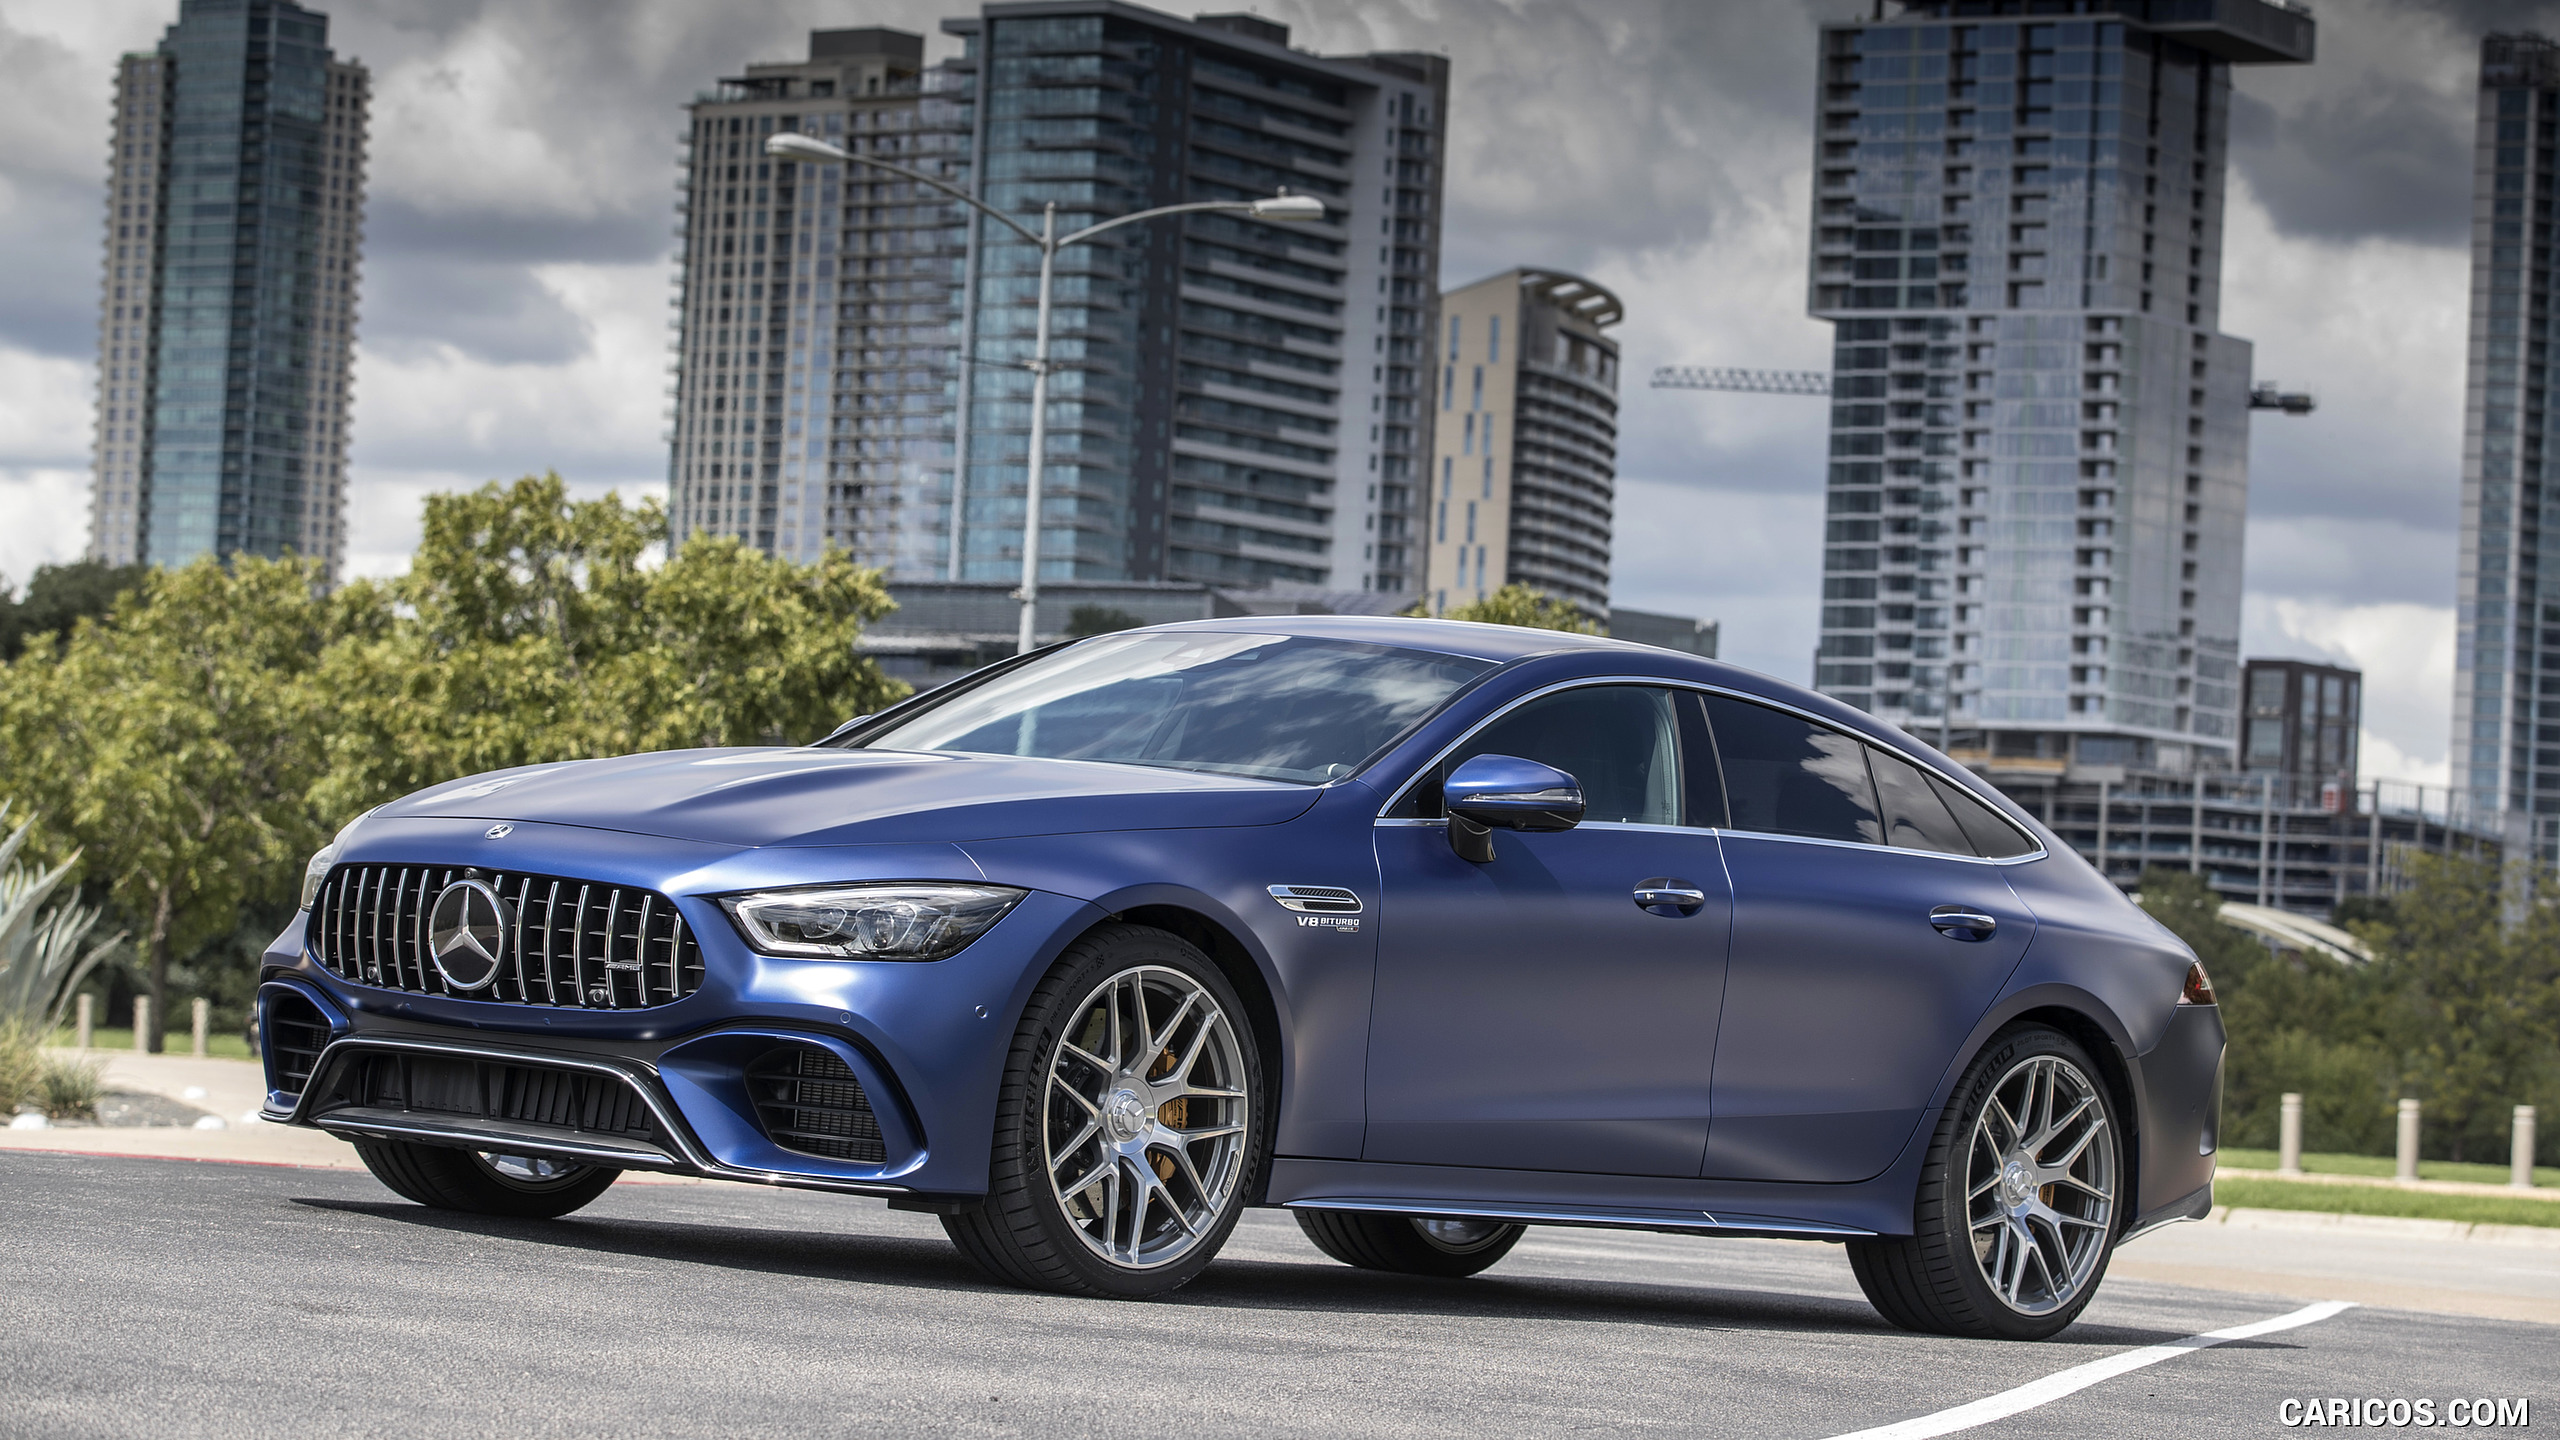 2019 Mercedes-AMG GT 63 S 4MATIC+ 4-Door Coupe - Front Three-Quarter, #122 of 427